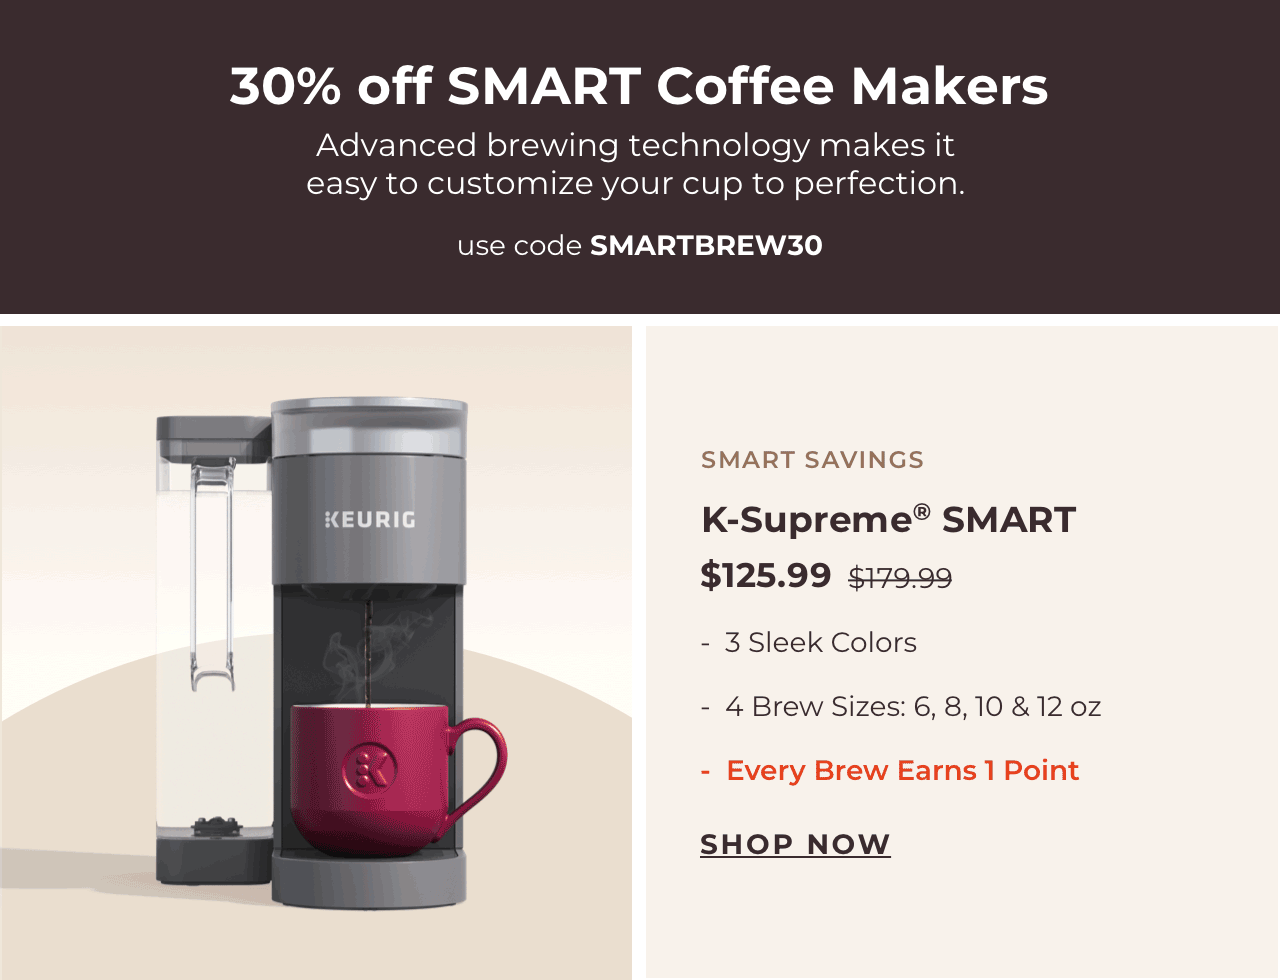 Save 30% on SMART coffee makers with code SMARTBREW30